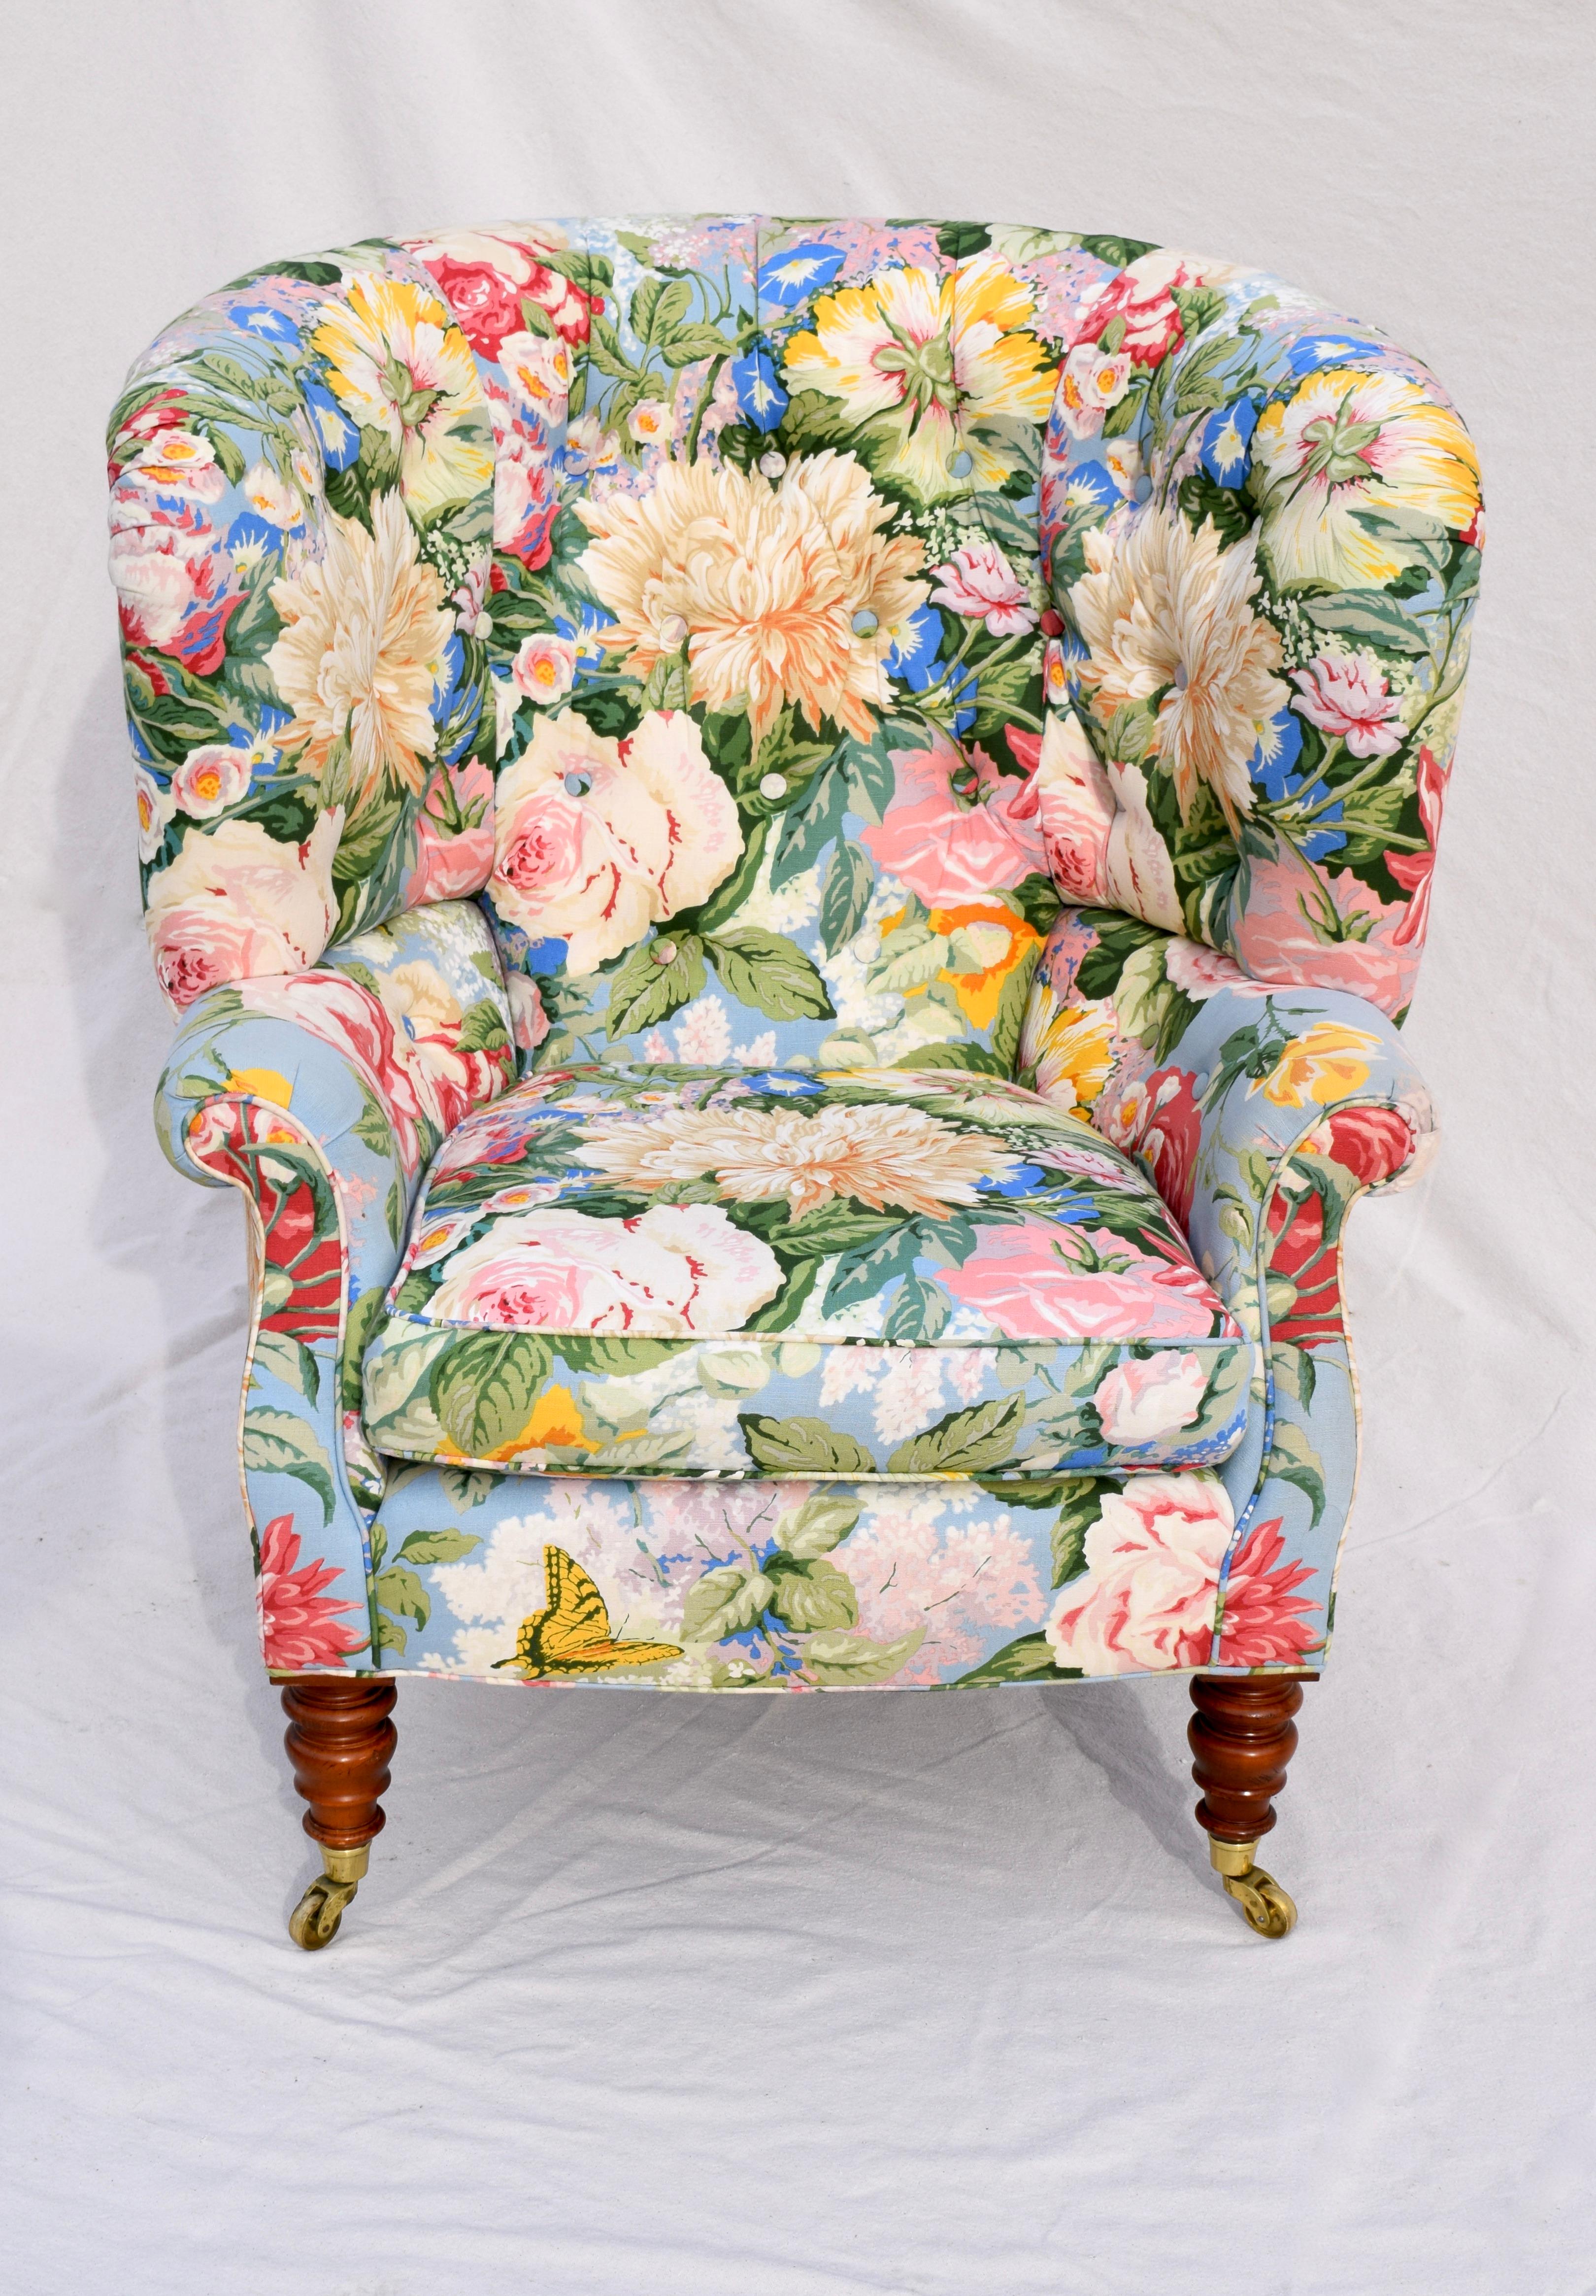 An exceptional cottage chic Baker Furniture Company wingback lounge chair. Features include enveloping, curved and tufted clamshell form on brass casters upholstered in vibrant multi floral cotton upholstery with a linen feel. Nice mid-size with